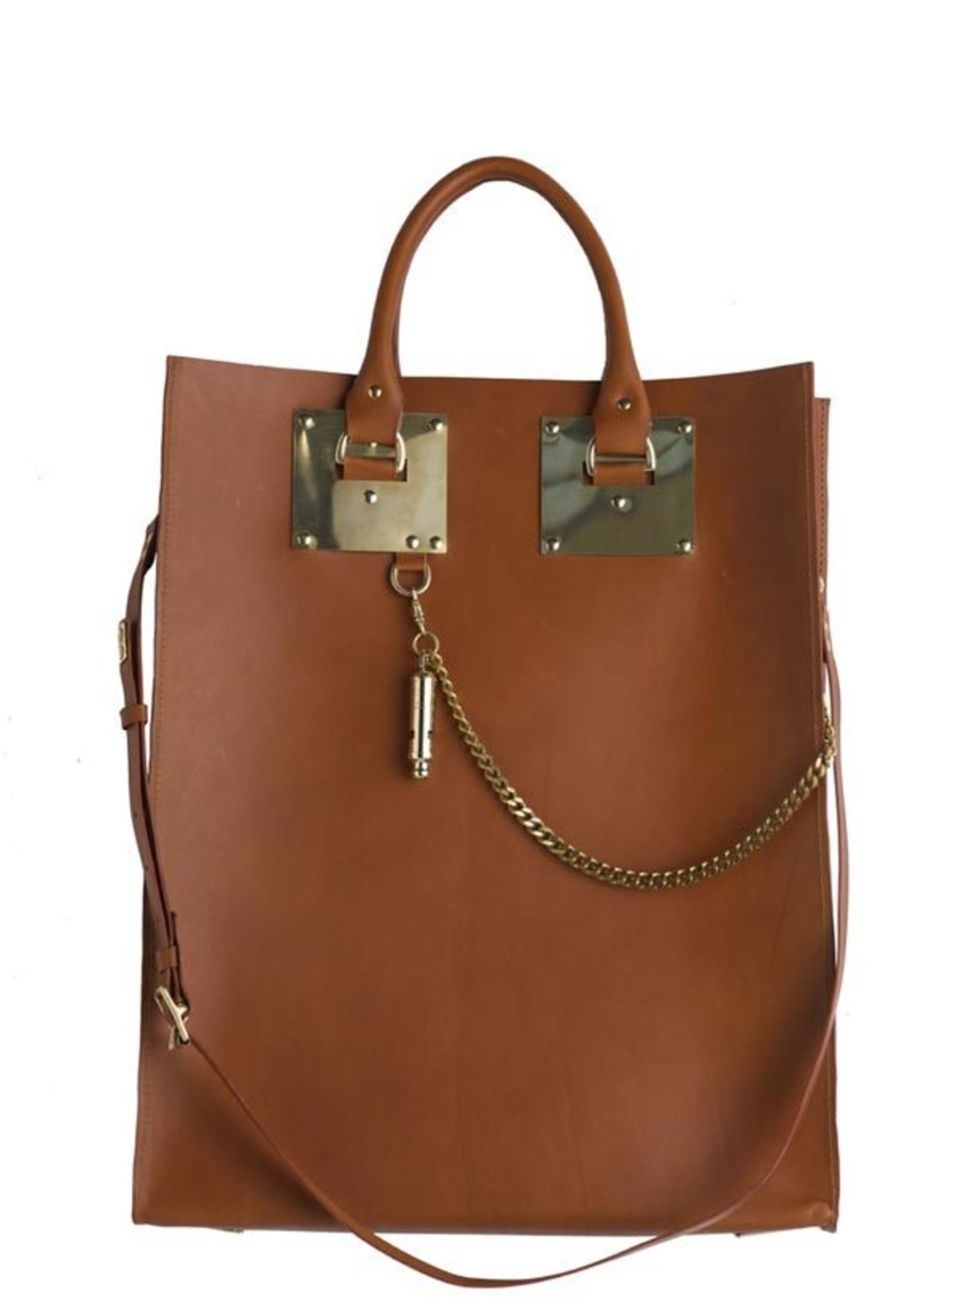 <p><a href="http://www.sophiehulme.com/">Sophie Hulme</a> leather tote, £350</p>